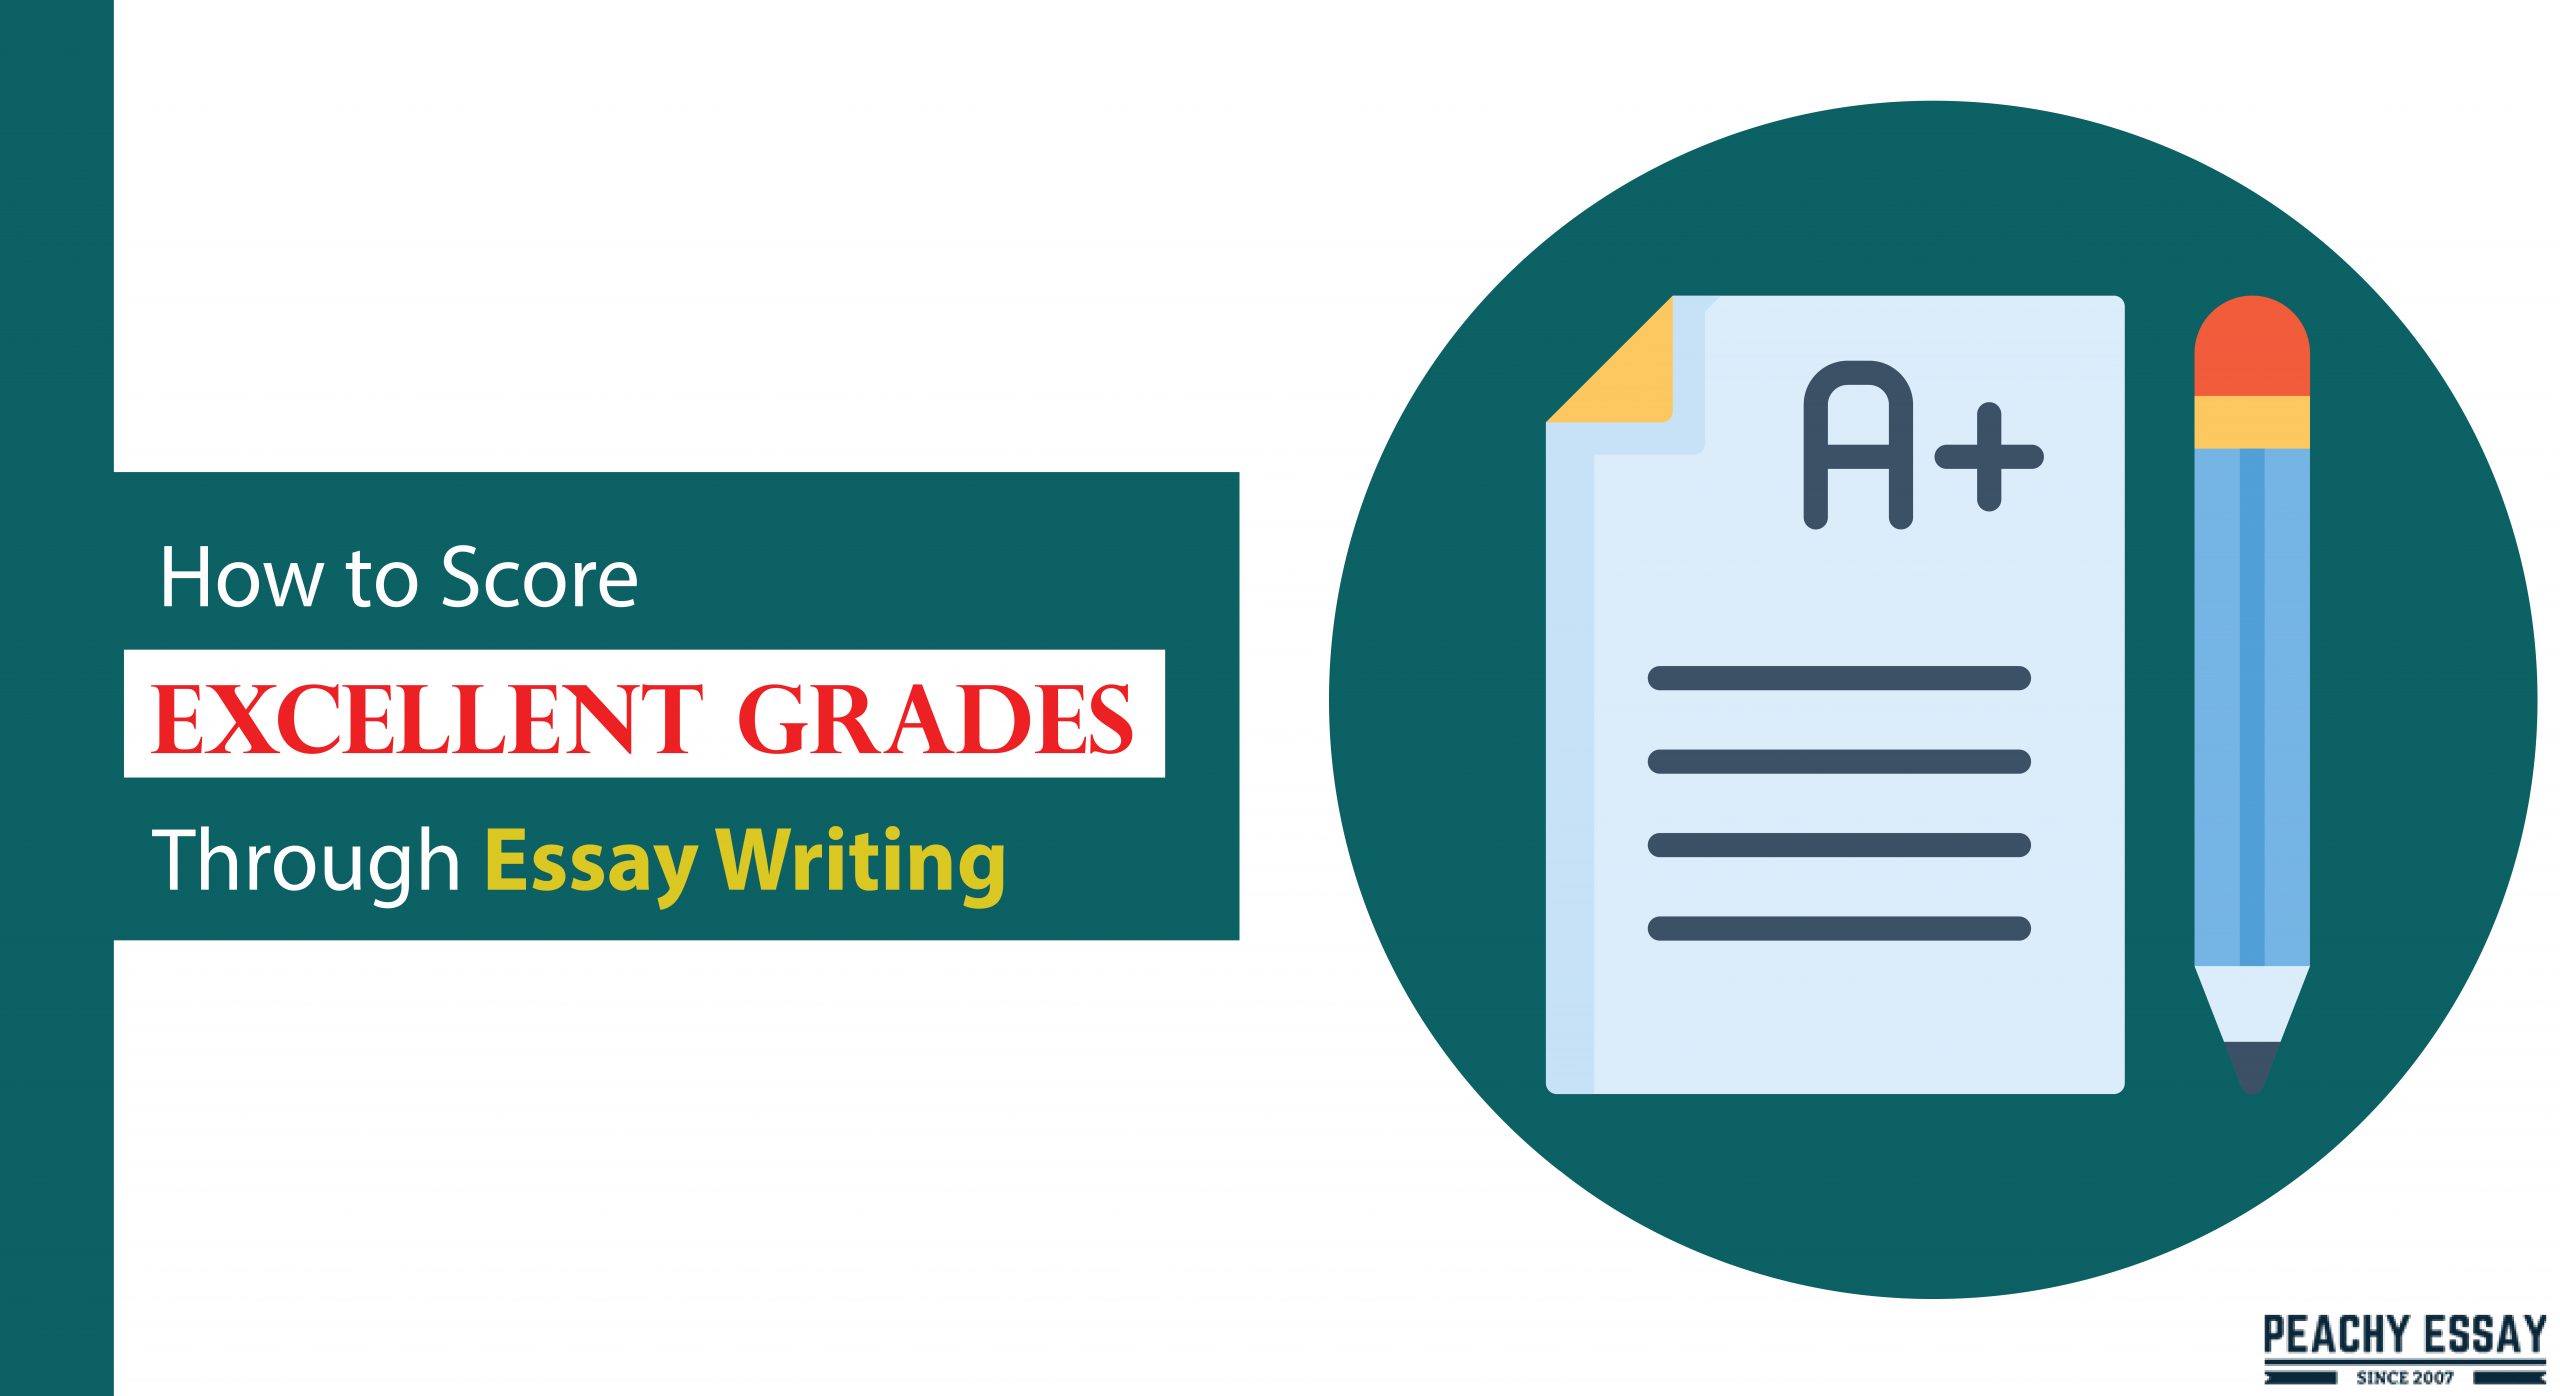 what is the website that grades your essay